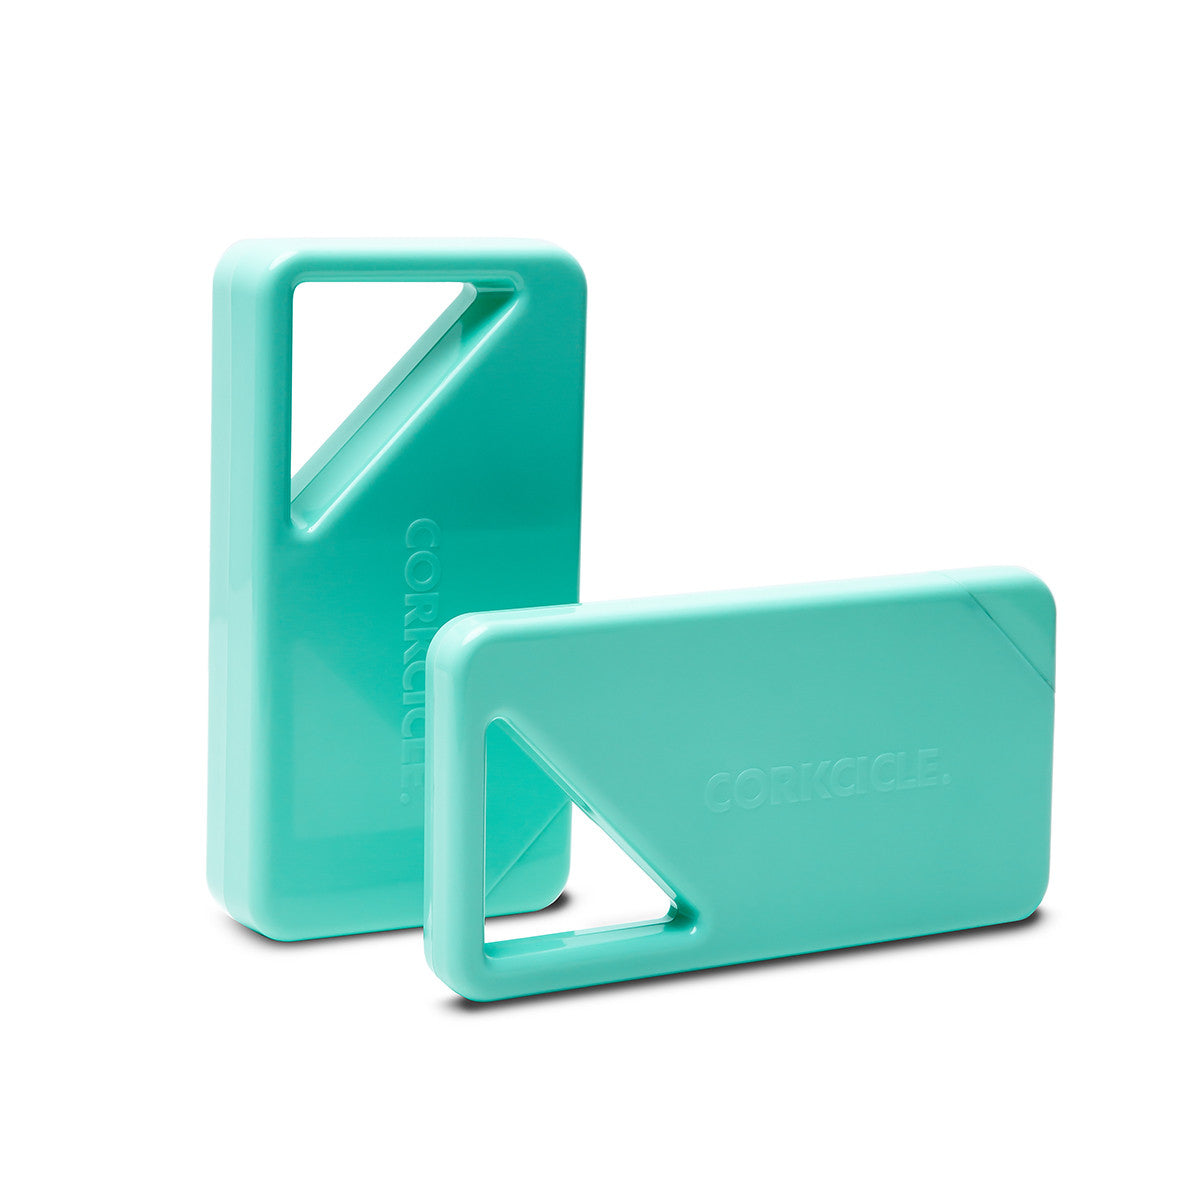 CORKCICLE Ice Pack for Lunchbox - Turquoise